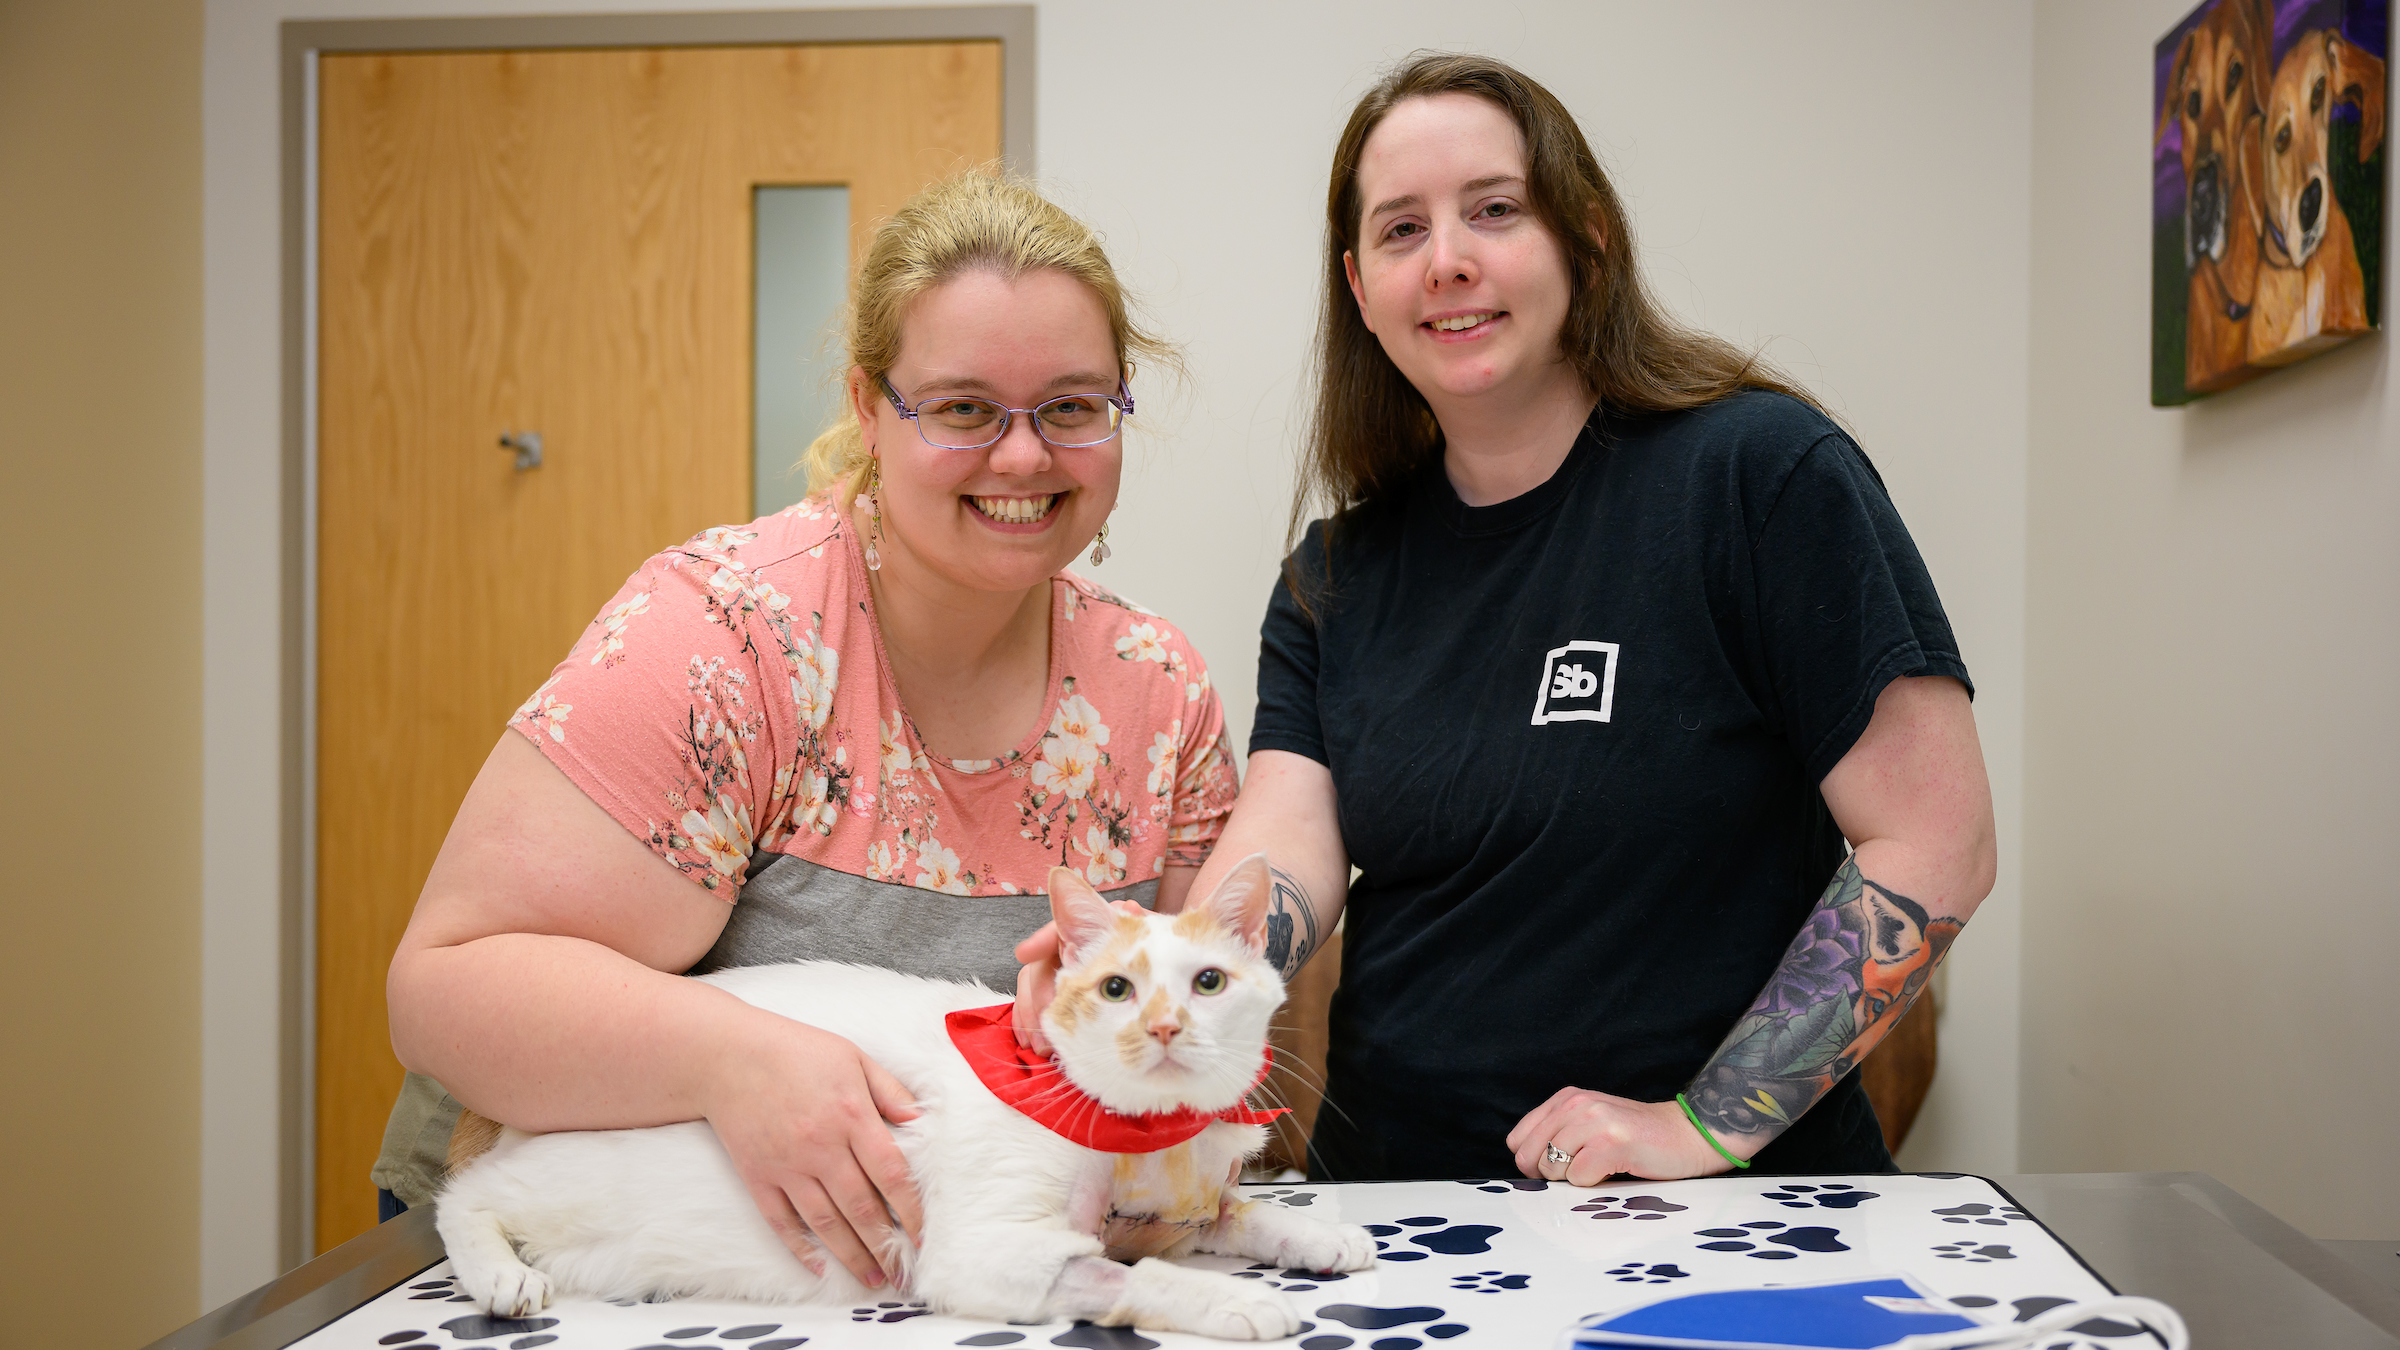 An orange-and-white cat wearing a red bandana lays on a blanket-covered exam table in a veterinary hospital. His two owners, a blonde woman wearing glasses and a pink shirt and a brunette wearing a black shirt, stand smiling behind him.